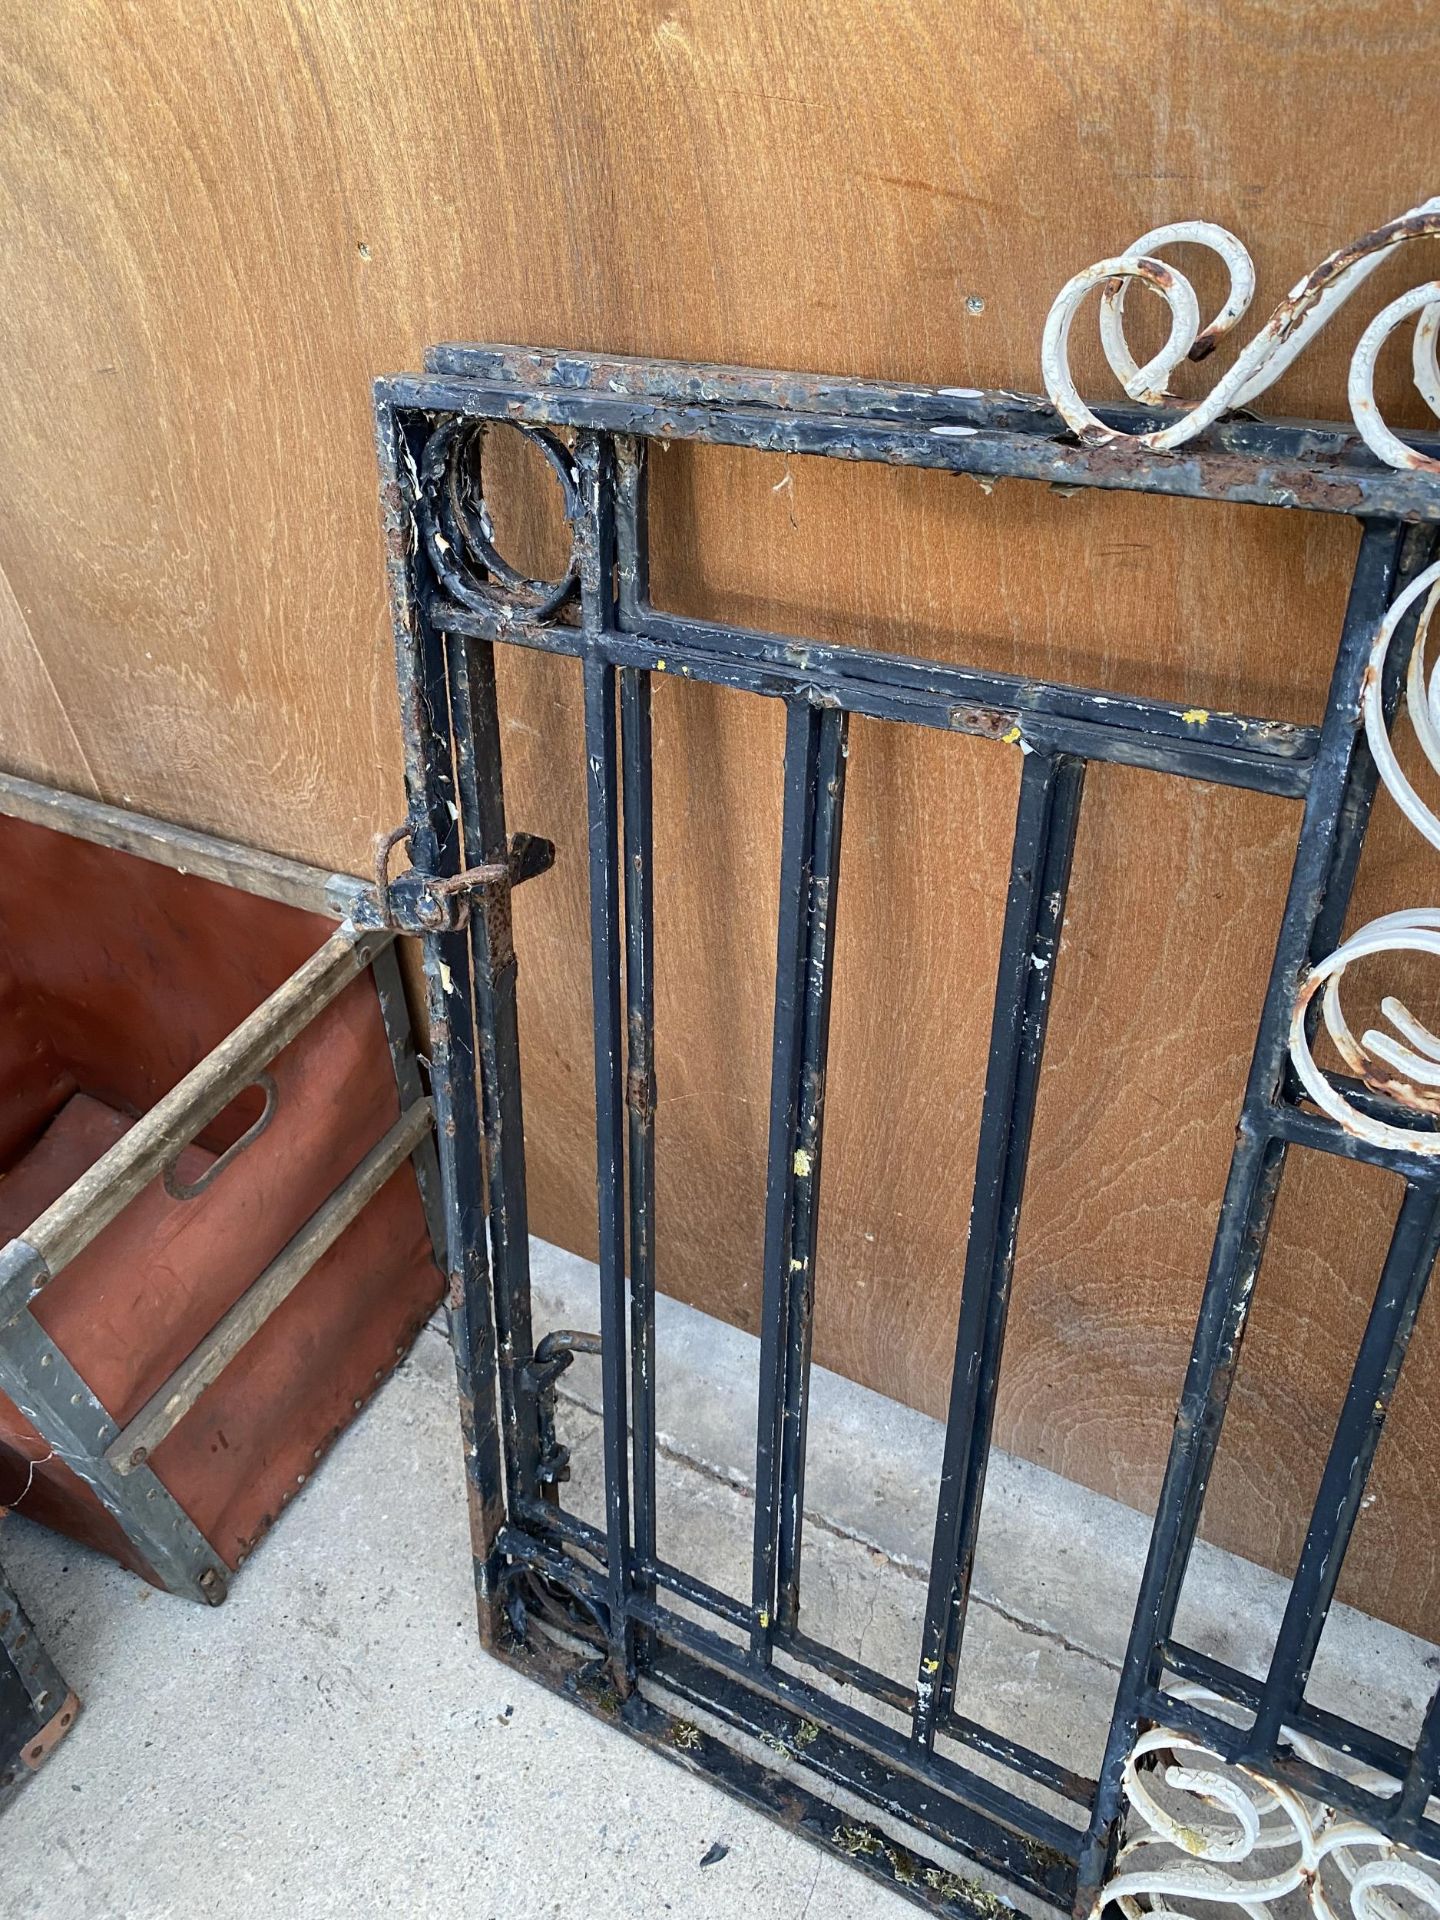 A PAIR OF DECORATIVE WROUGHT IRON GARDEN GATES (H:104CM W:119CM) - Image 3 of 4